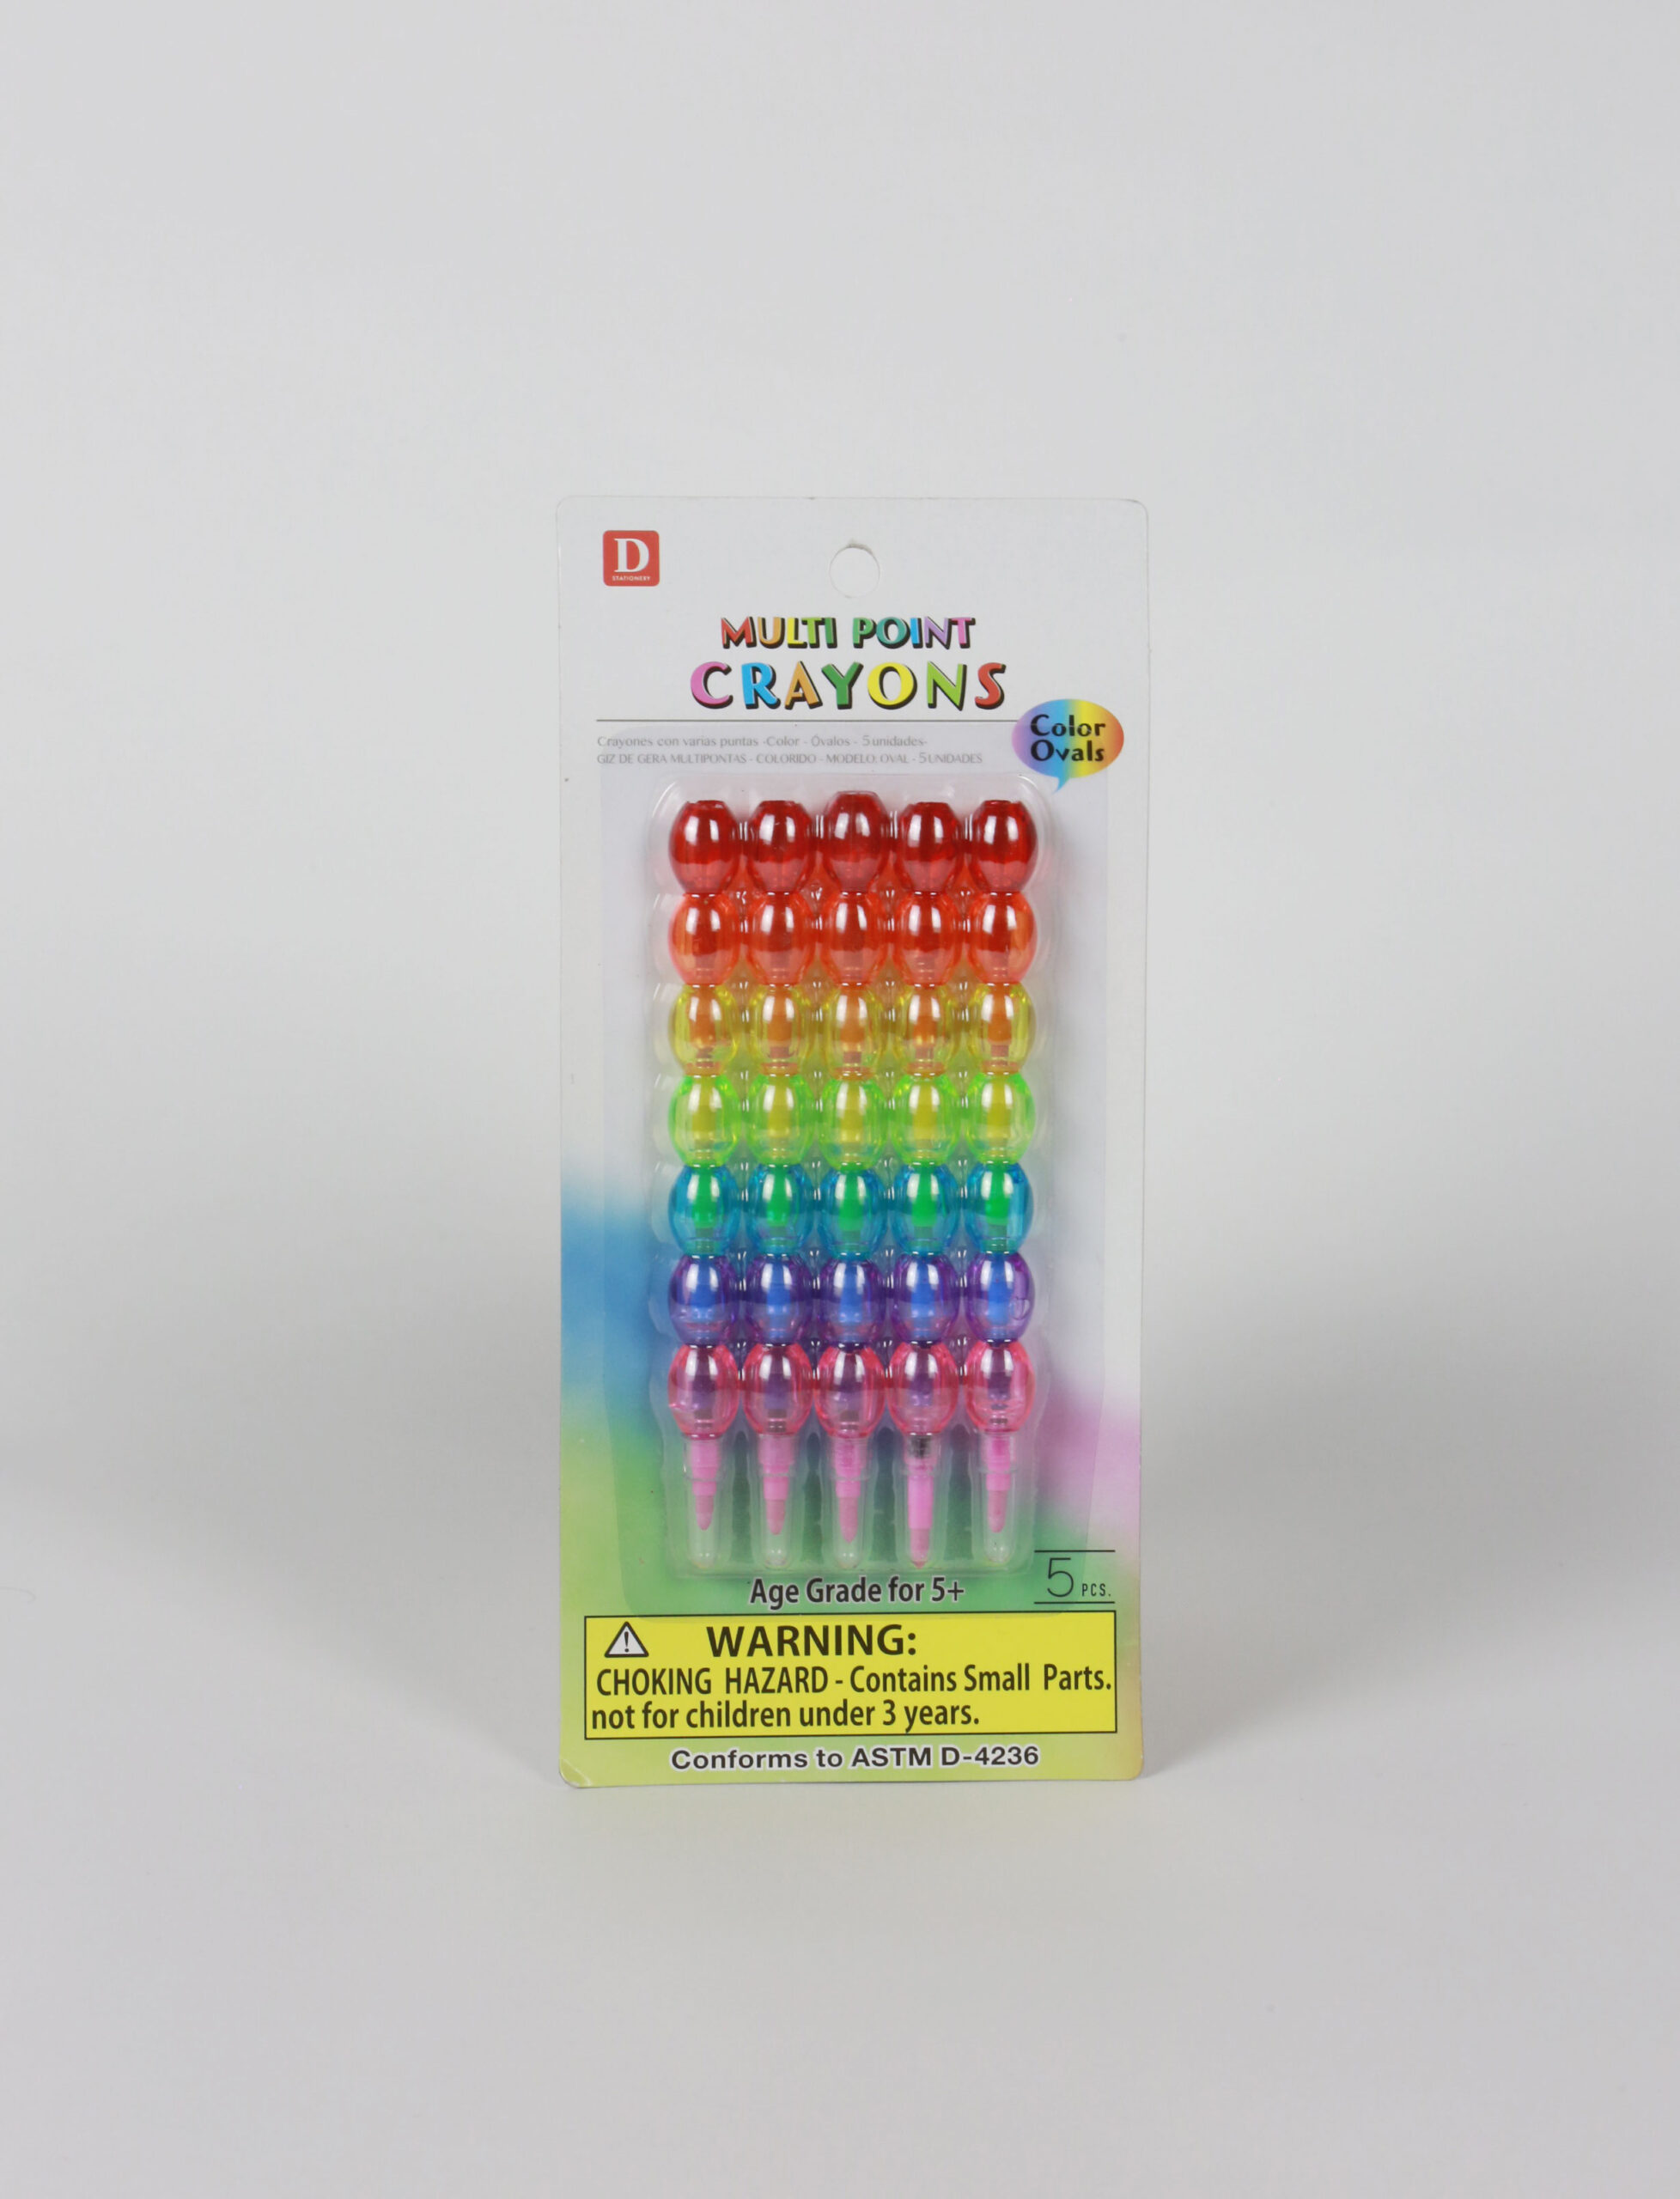 24 Oil Crayons - Daiso Japan Middle East